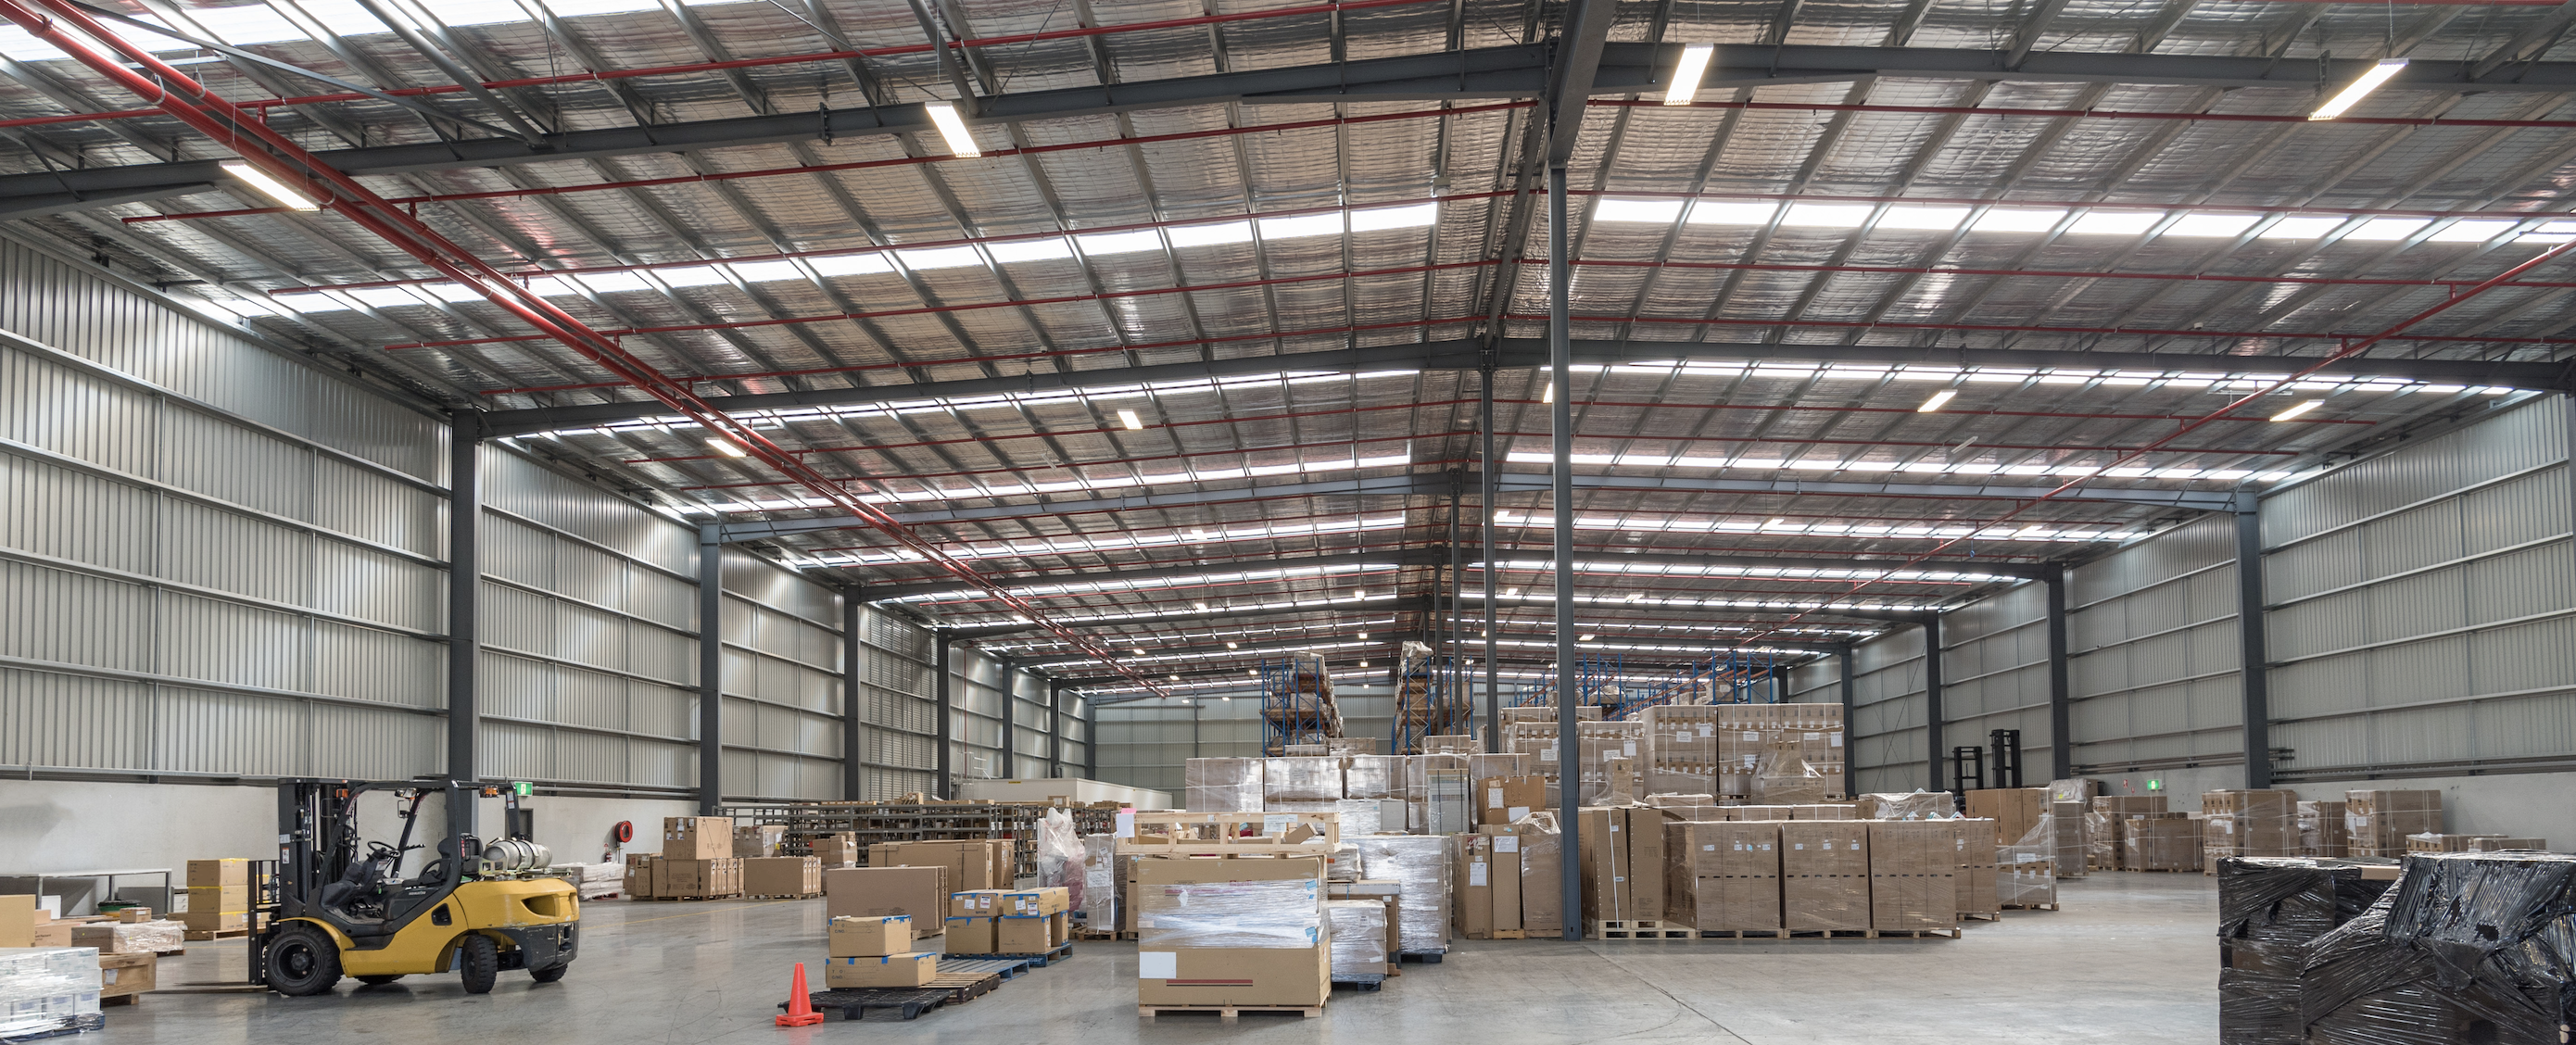 What Does Kitting Mean in Warehousing?